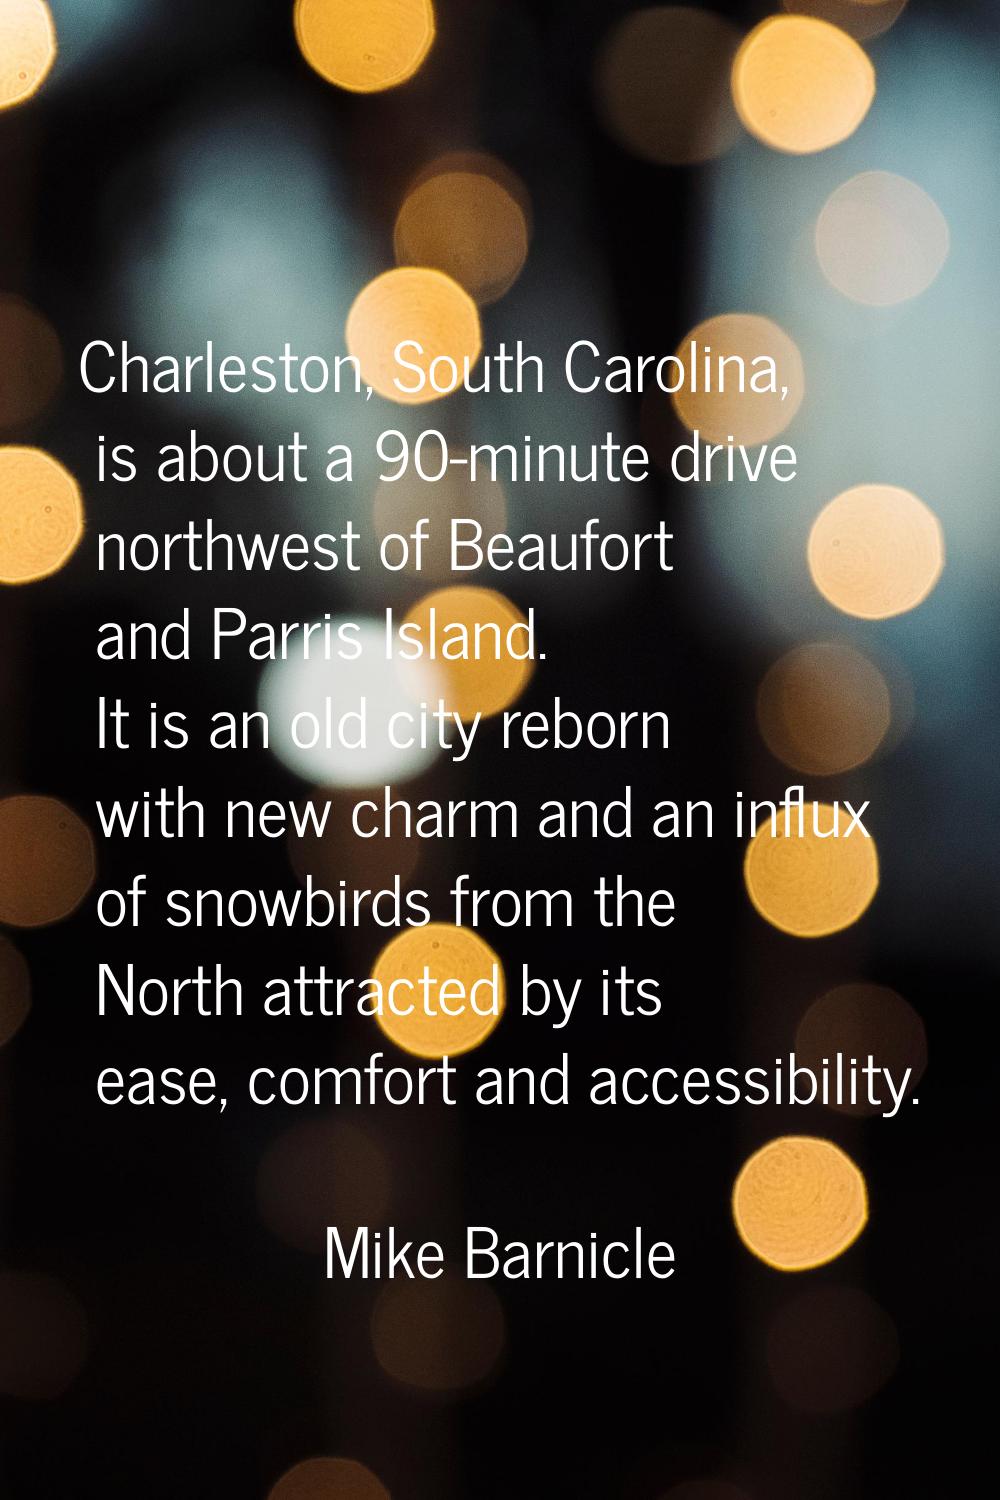 Charleston, South Carolina, is about a 90-minute drive northwest of Beaufort and Parris Island. It 